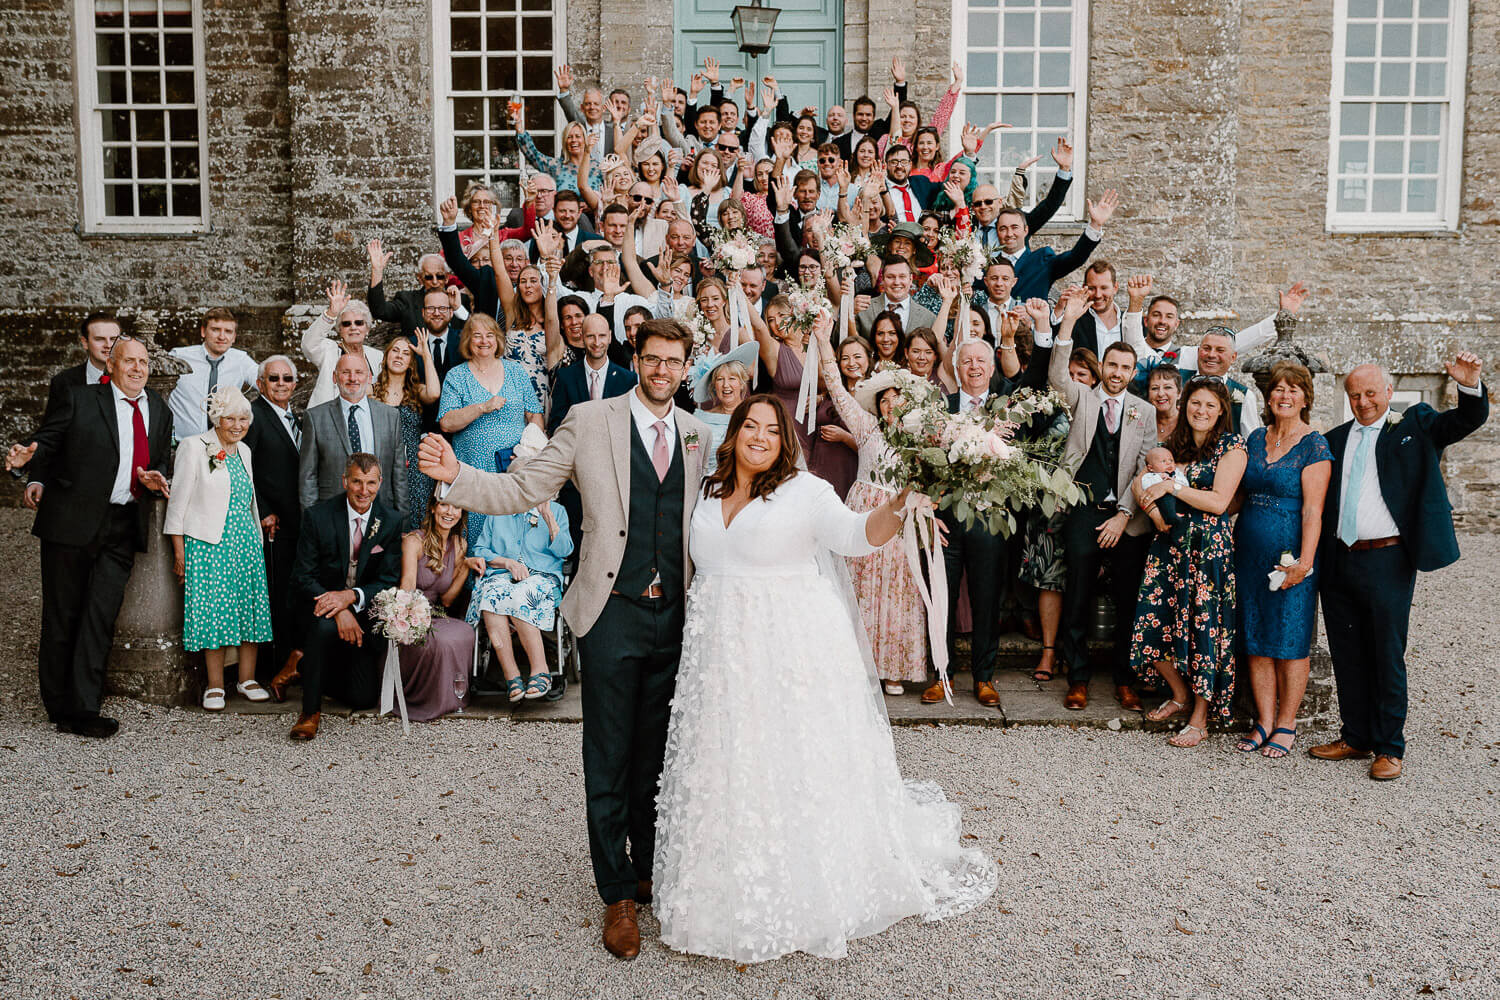 Bride and groom with all their wedding guests pose for a photo on the front steps at Kingston Estate, Devon.